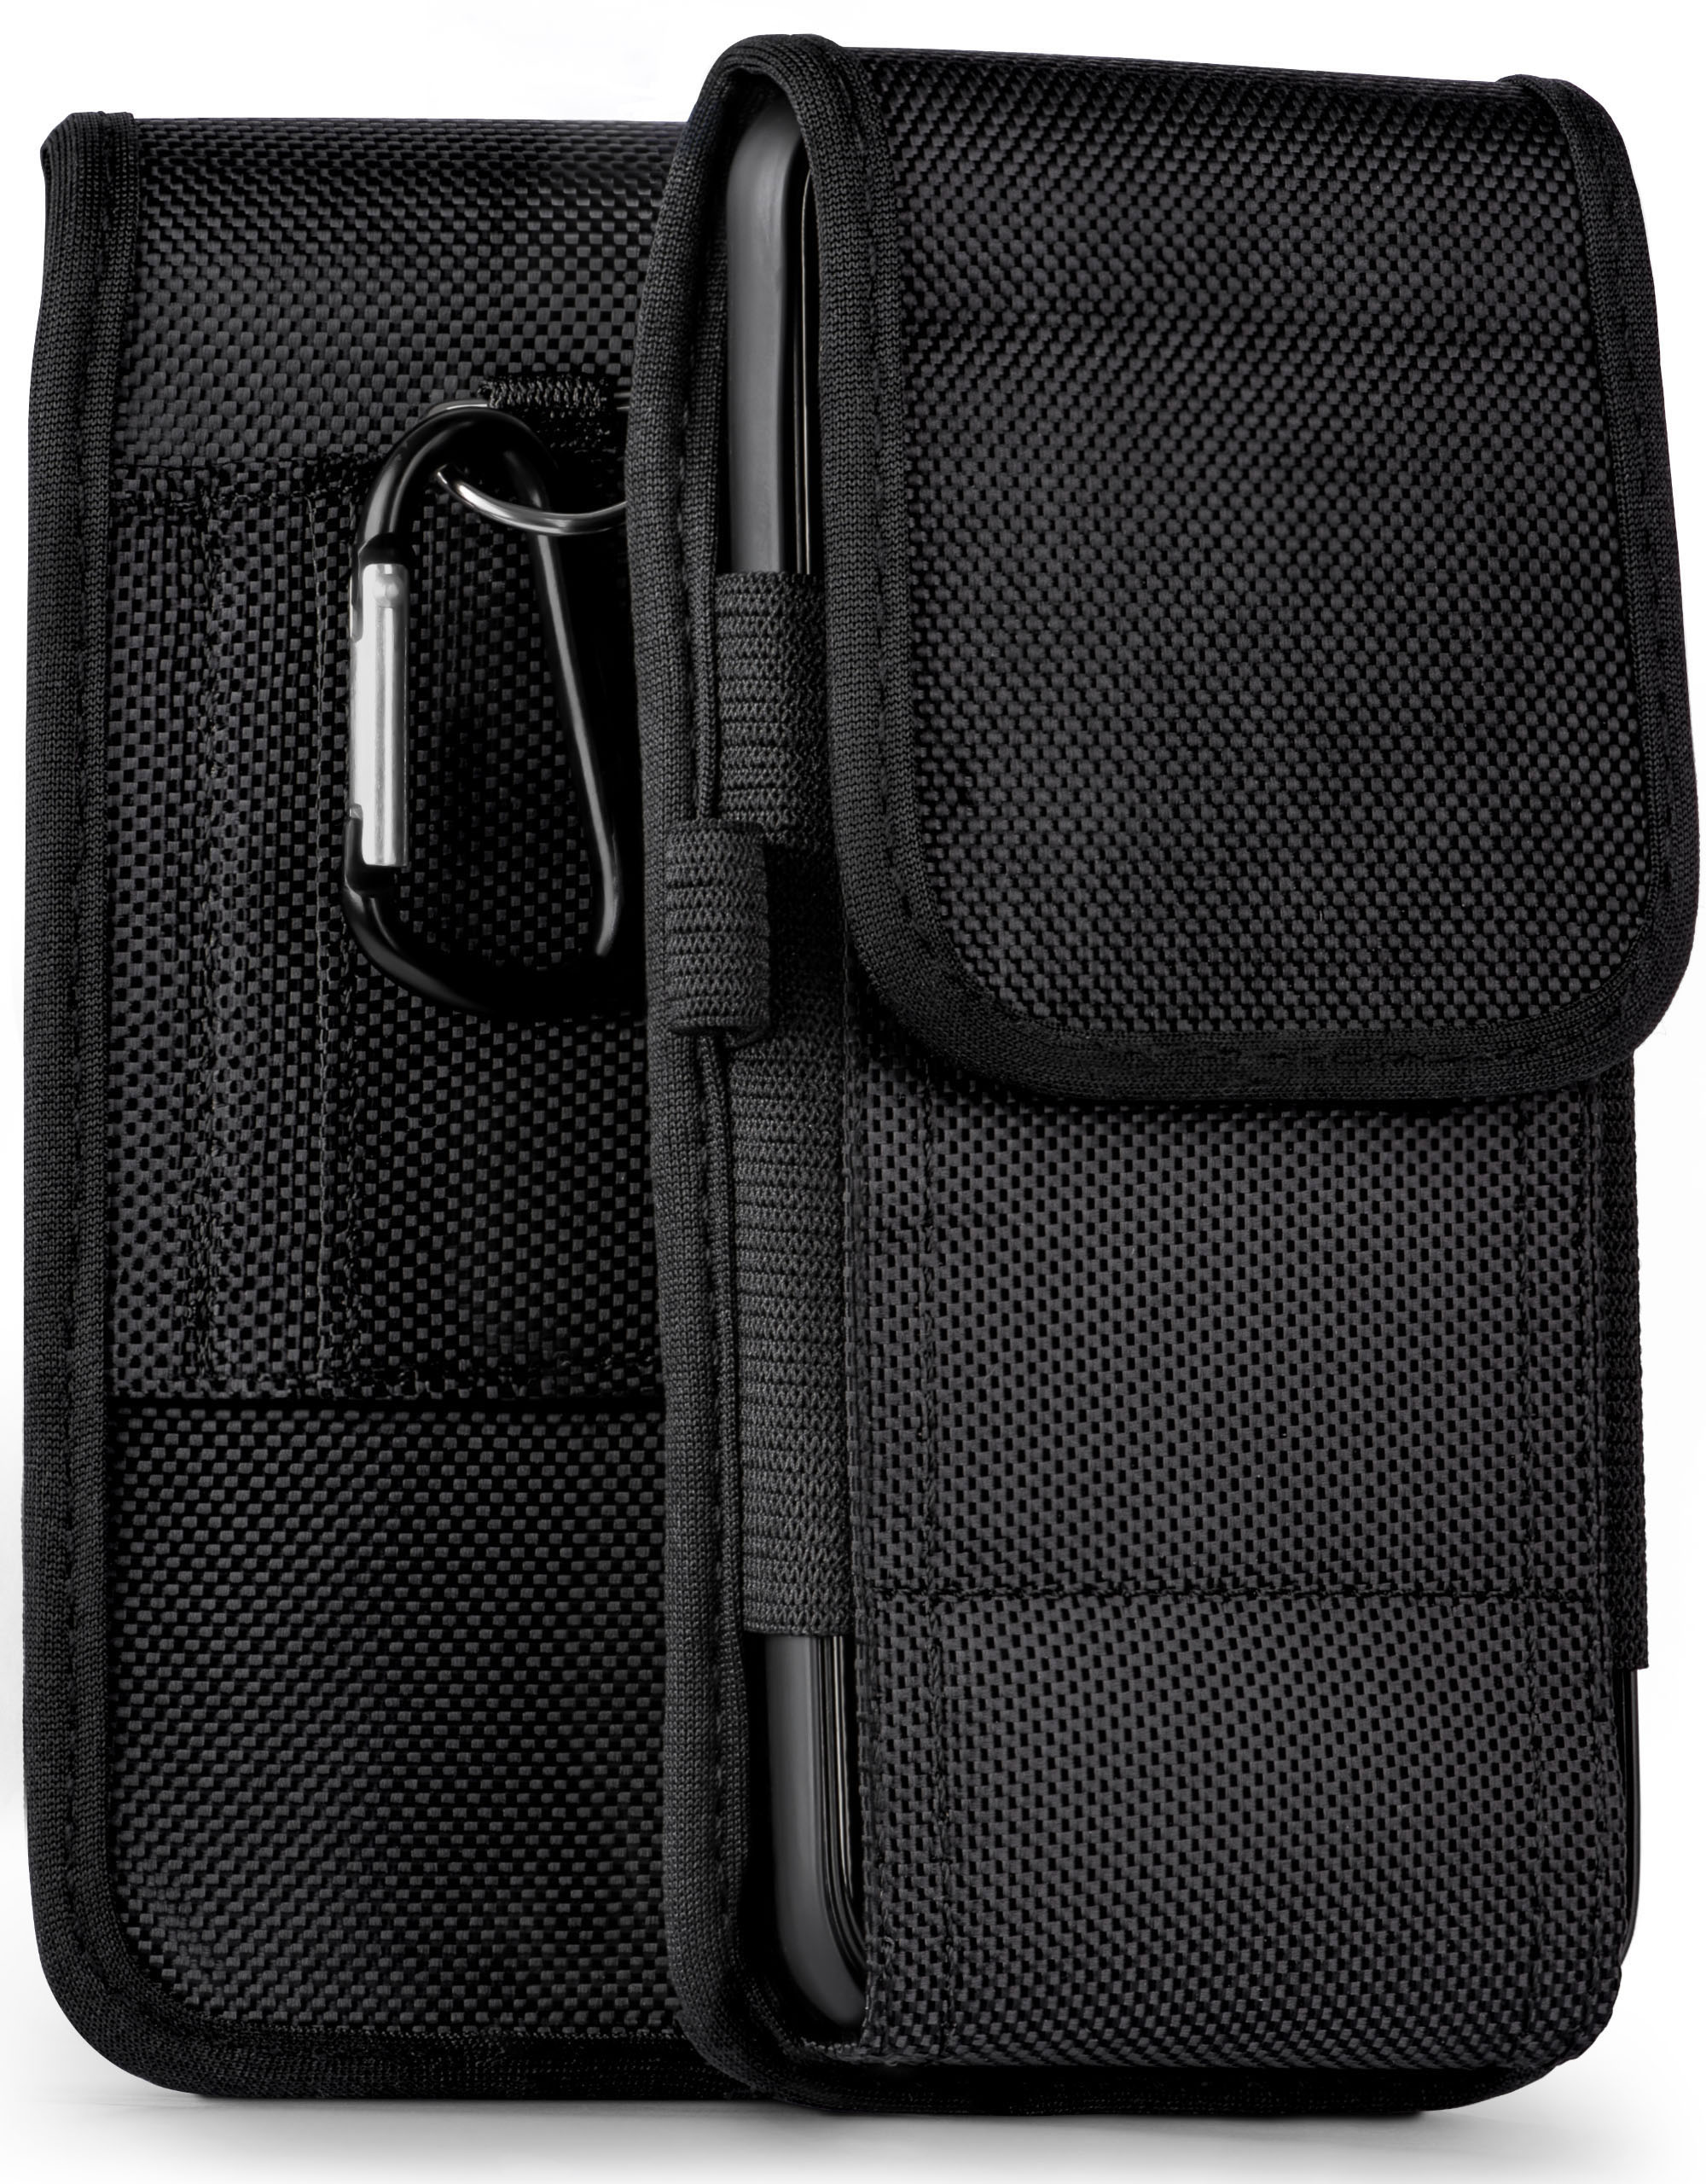 10 TCL, Agility Case, Trail L, Holster, MOEX